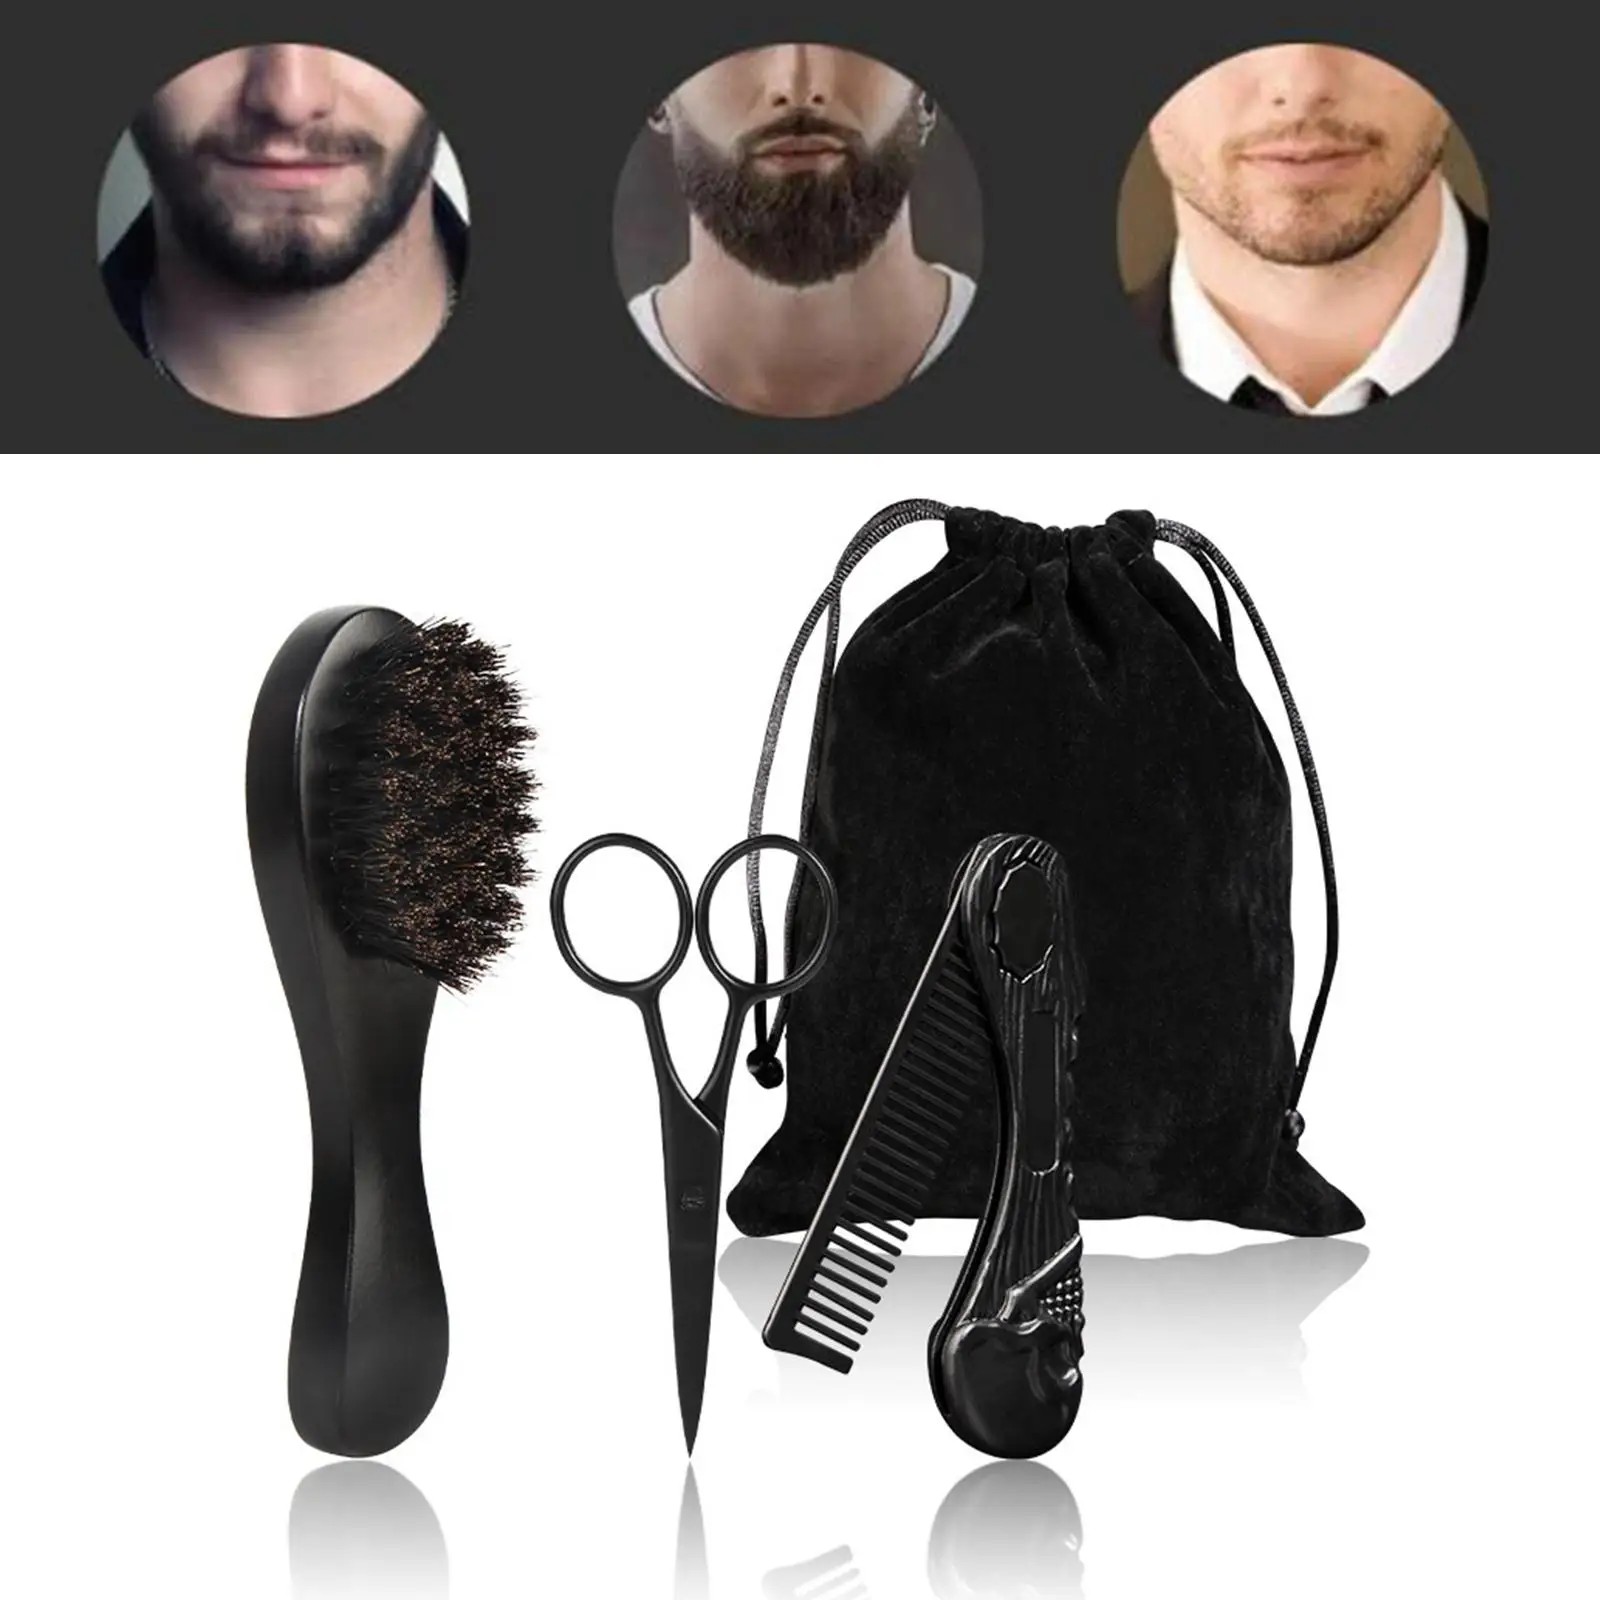 3x Men Beard Care Kit Wooden Comb Mustache Scissors for Travel Cleaning Grooming Tool